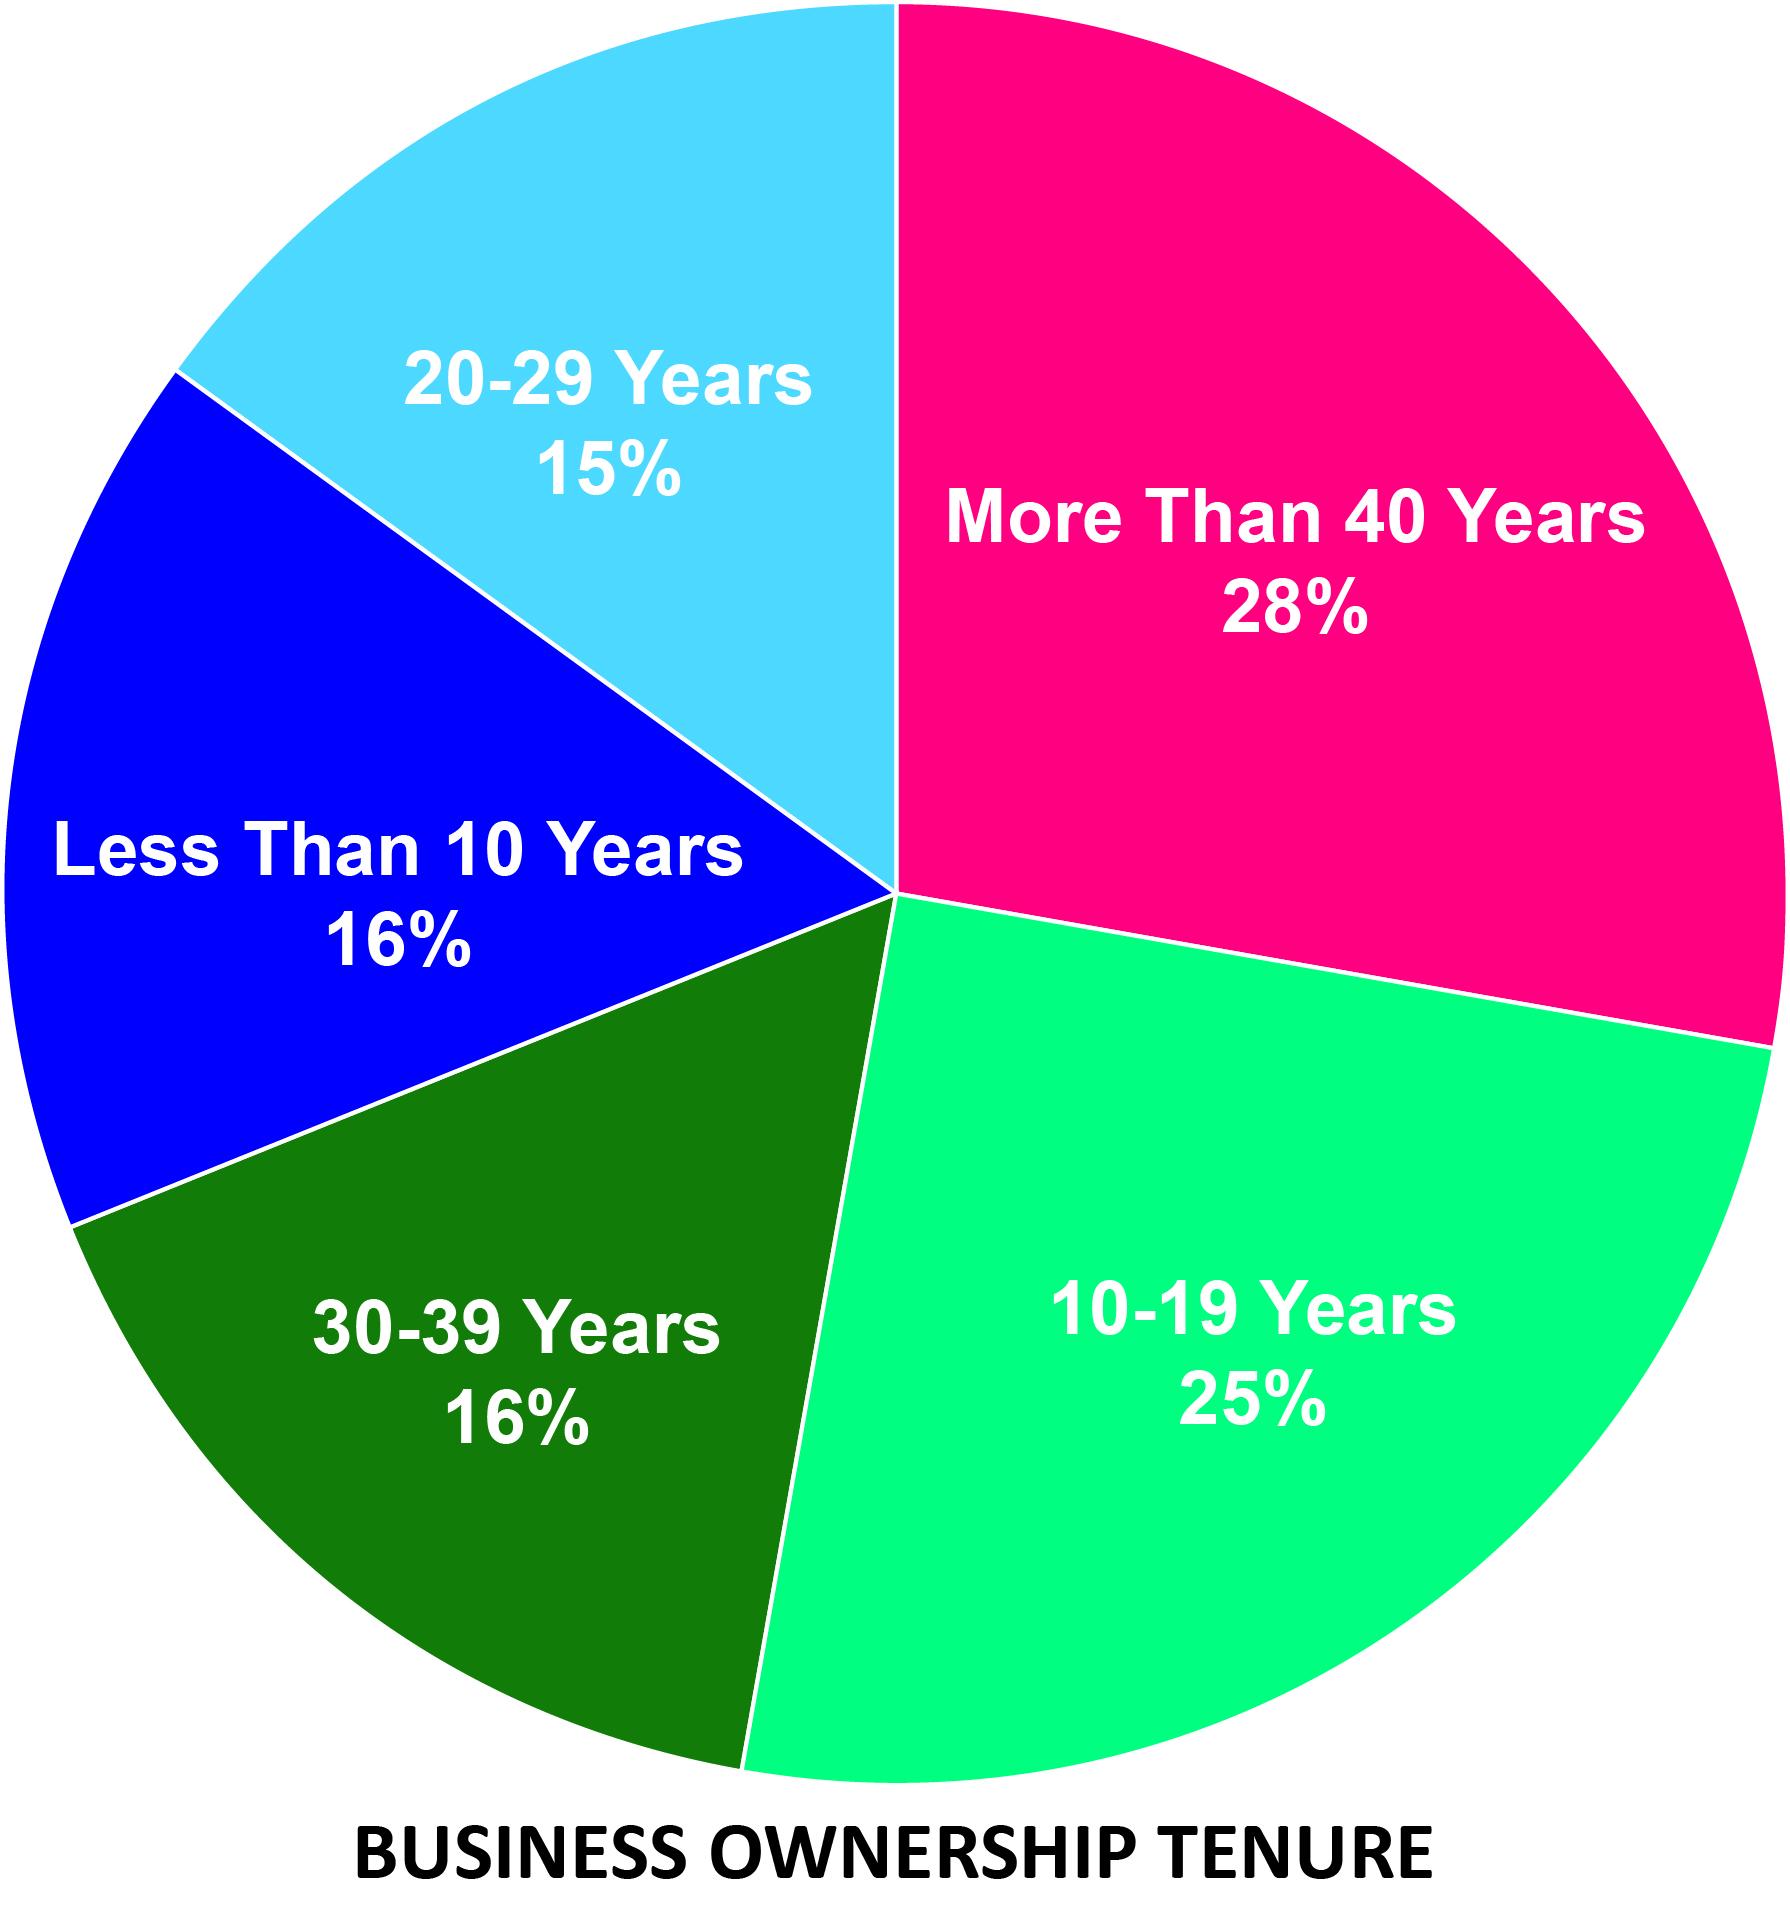 COVID-19 Impact Survey Results on Maryland Producers on Business ownership tenure. 16%-Less Than Ten years, 25%-10-19 years, 15-20-29 years, 16%-30-39 years, and 28%-More Than 40 years